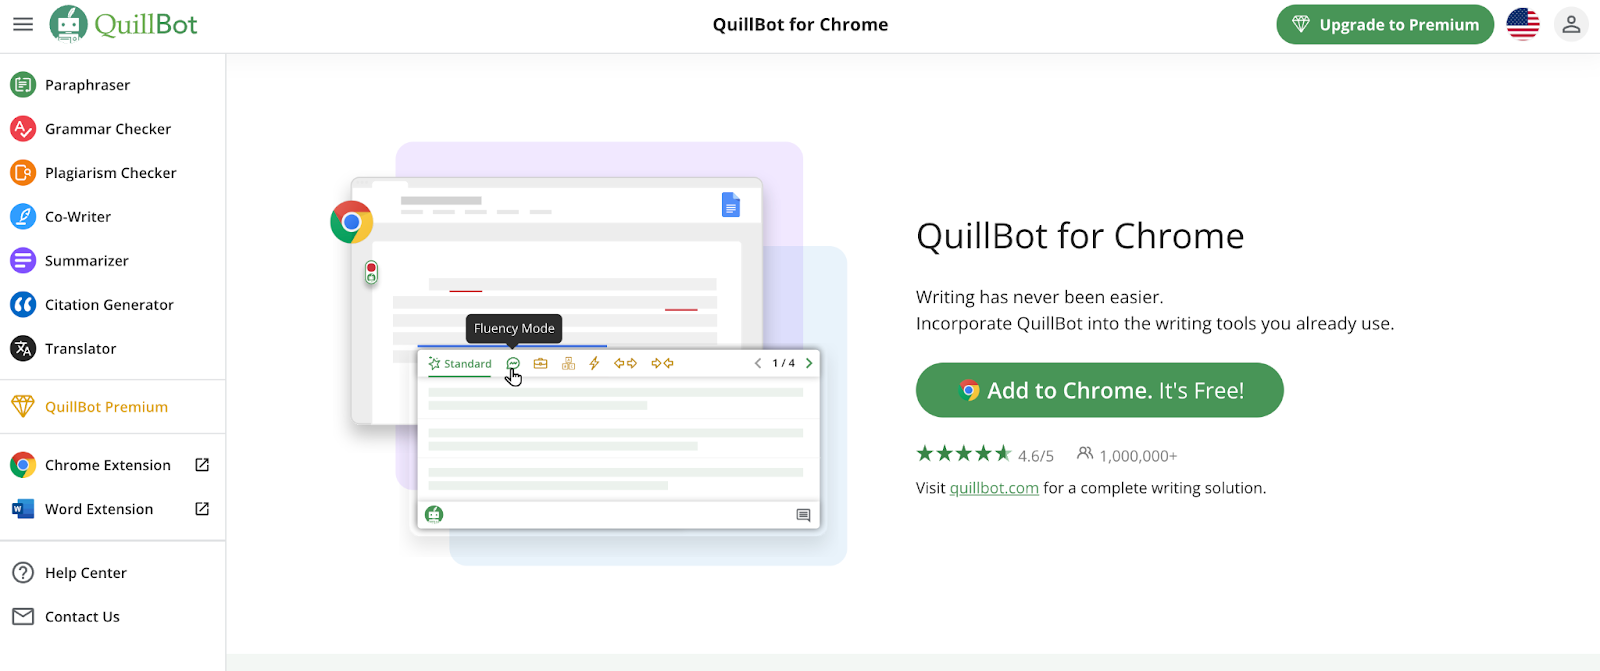 Shows QuillBot's simple layout with a big range of features down the left hand side.